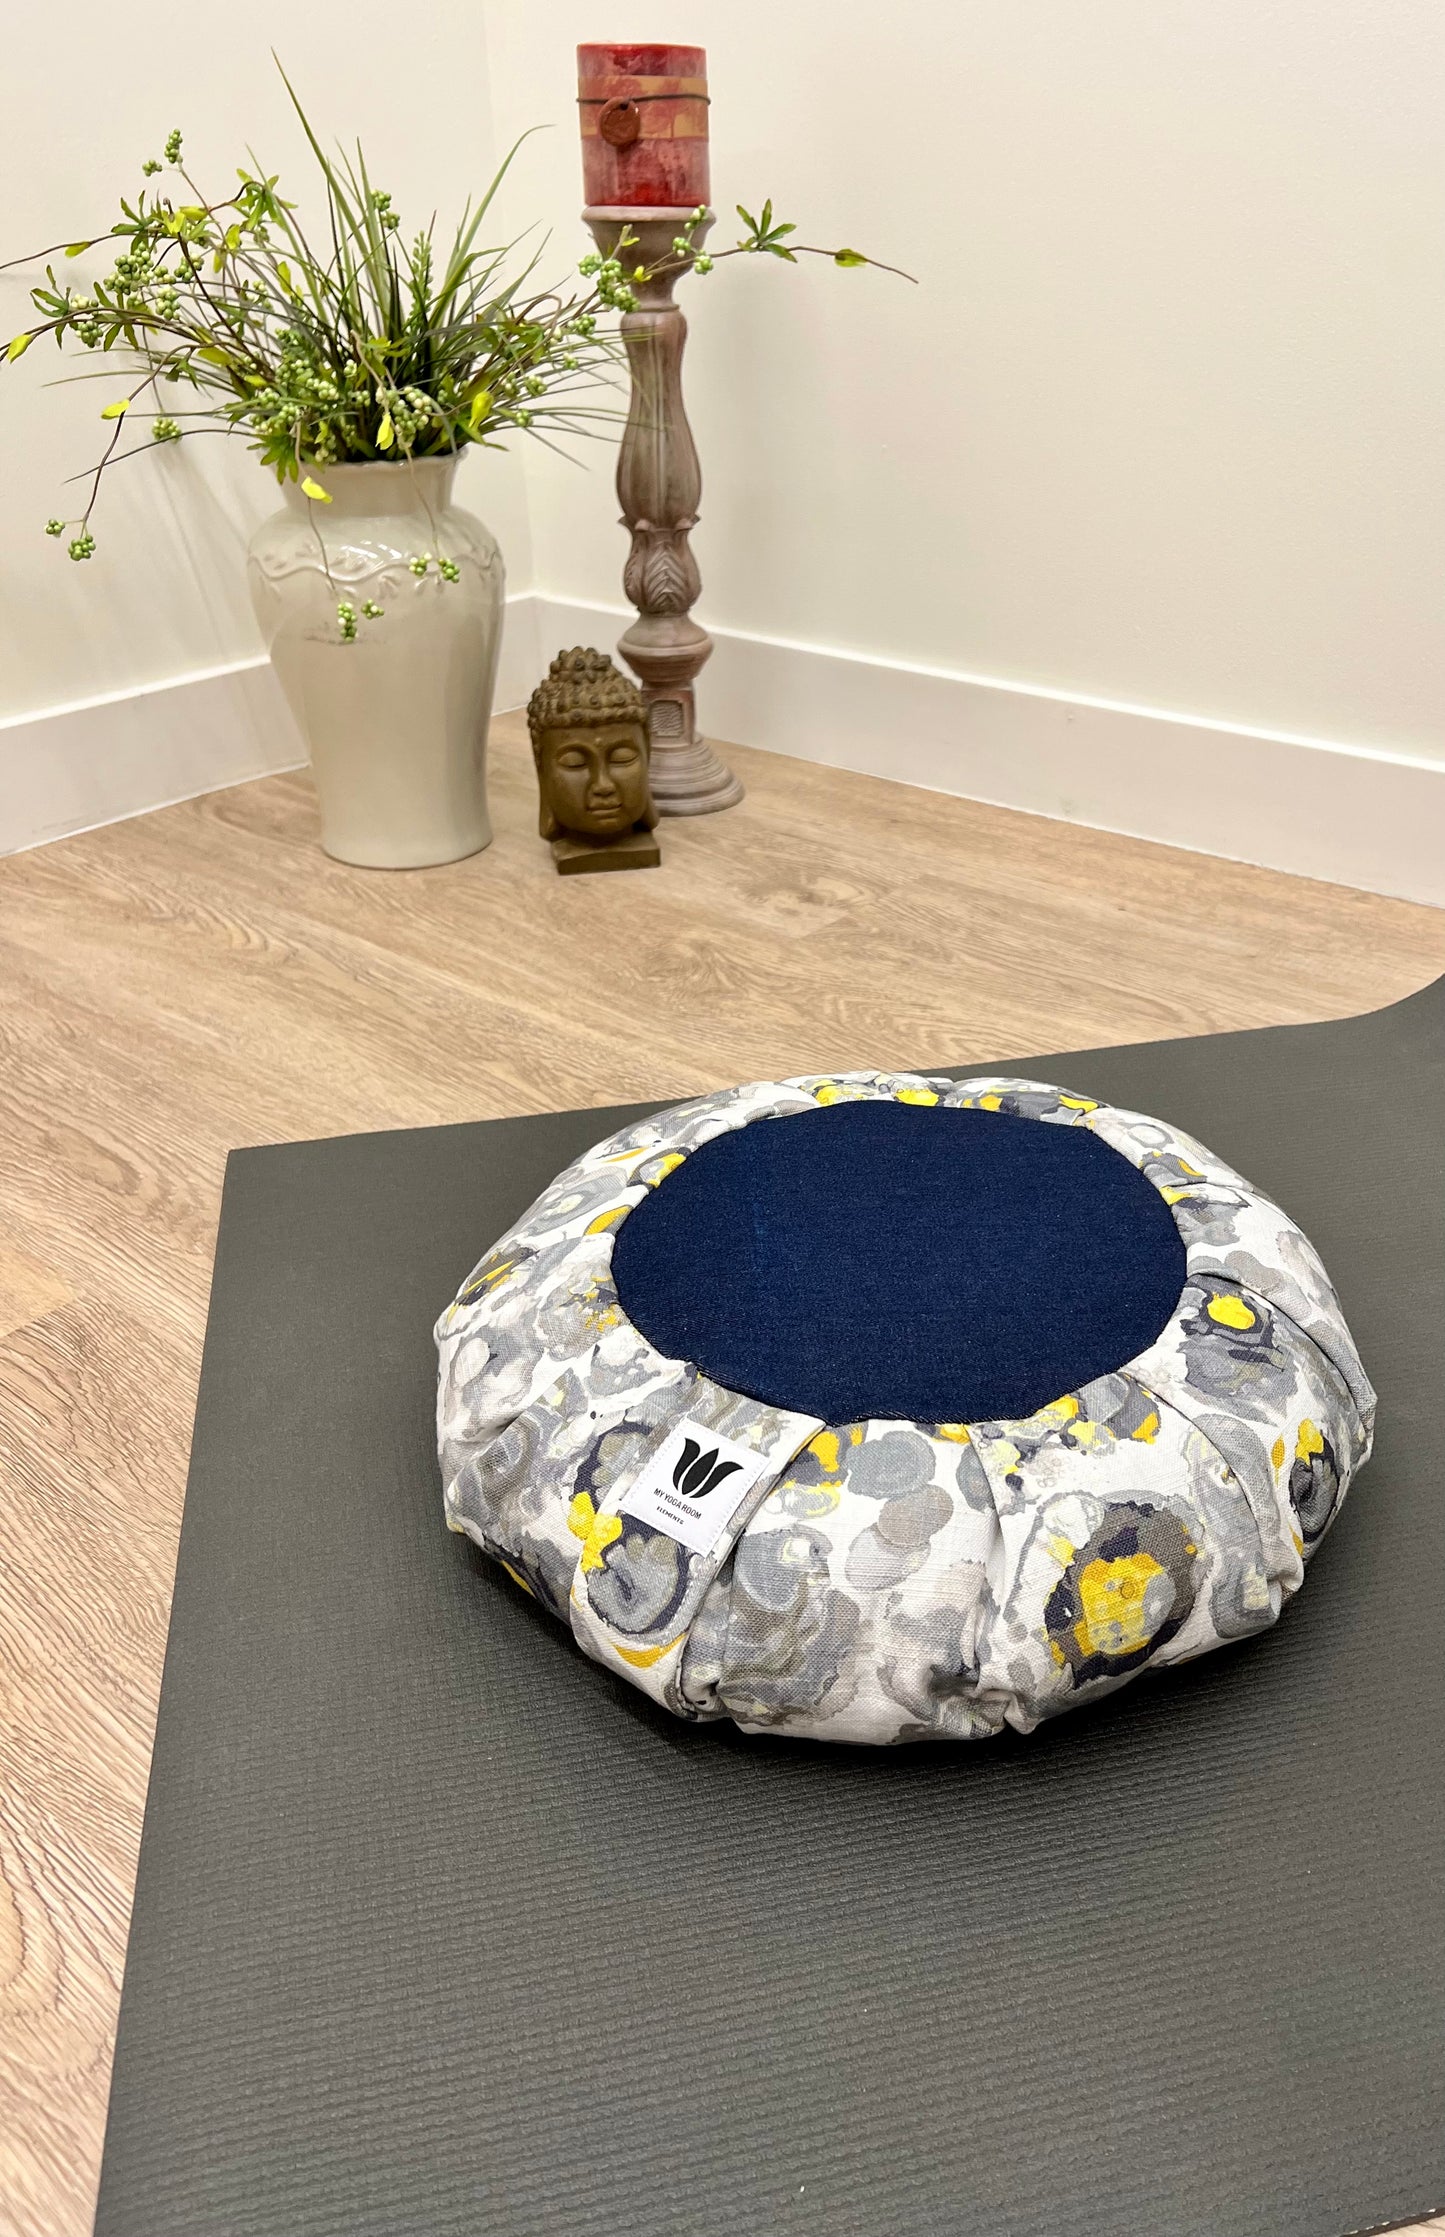 Handcrafted premium cotton canvas fabric meditation seat cushion in grey blue yellow water colour print fabric. Align the spine and body in comfort to calm the monkey mind in your meditation practice. Handcrafted in Calgary, Alberta Canada